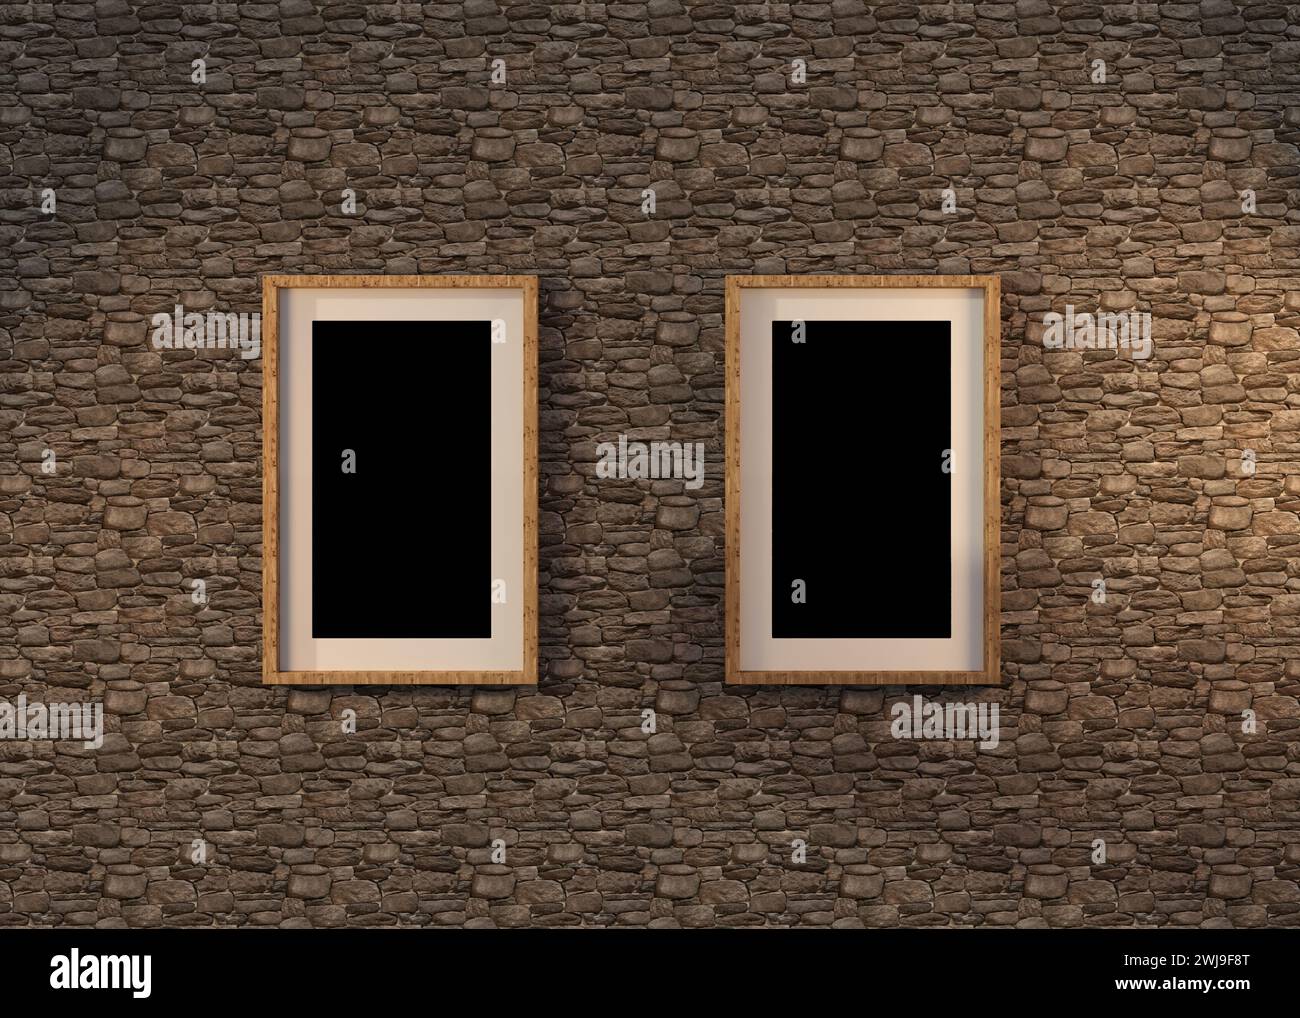 Blank wooden frame on a stone wall, mokeup, 3D Illustration. Stock Photo